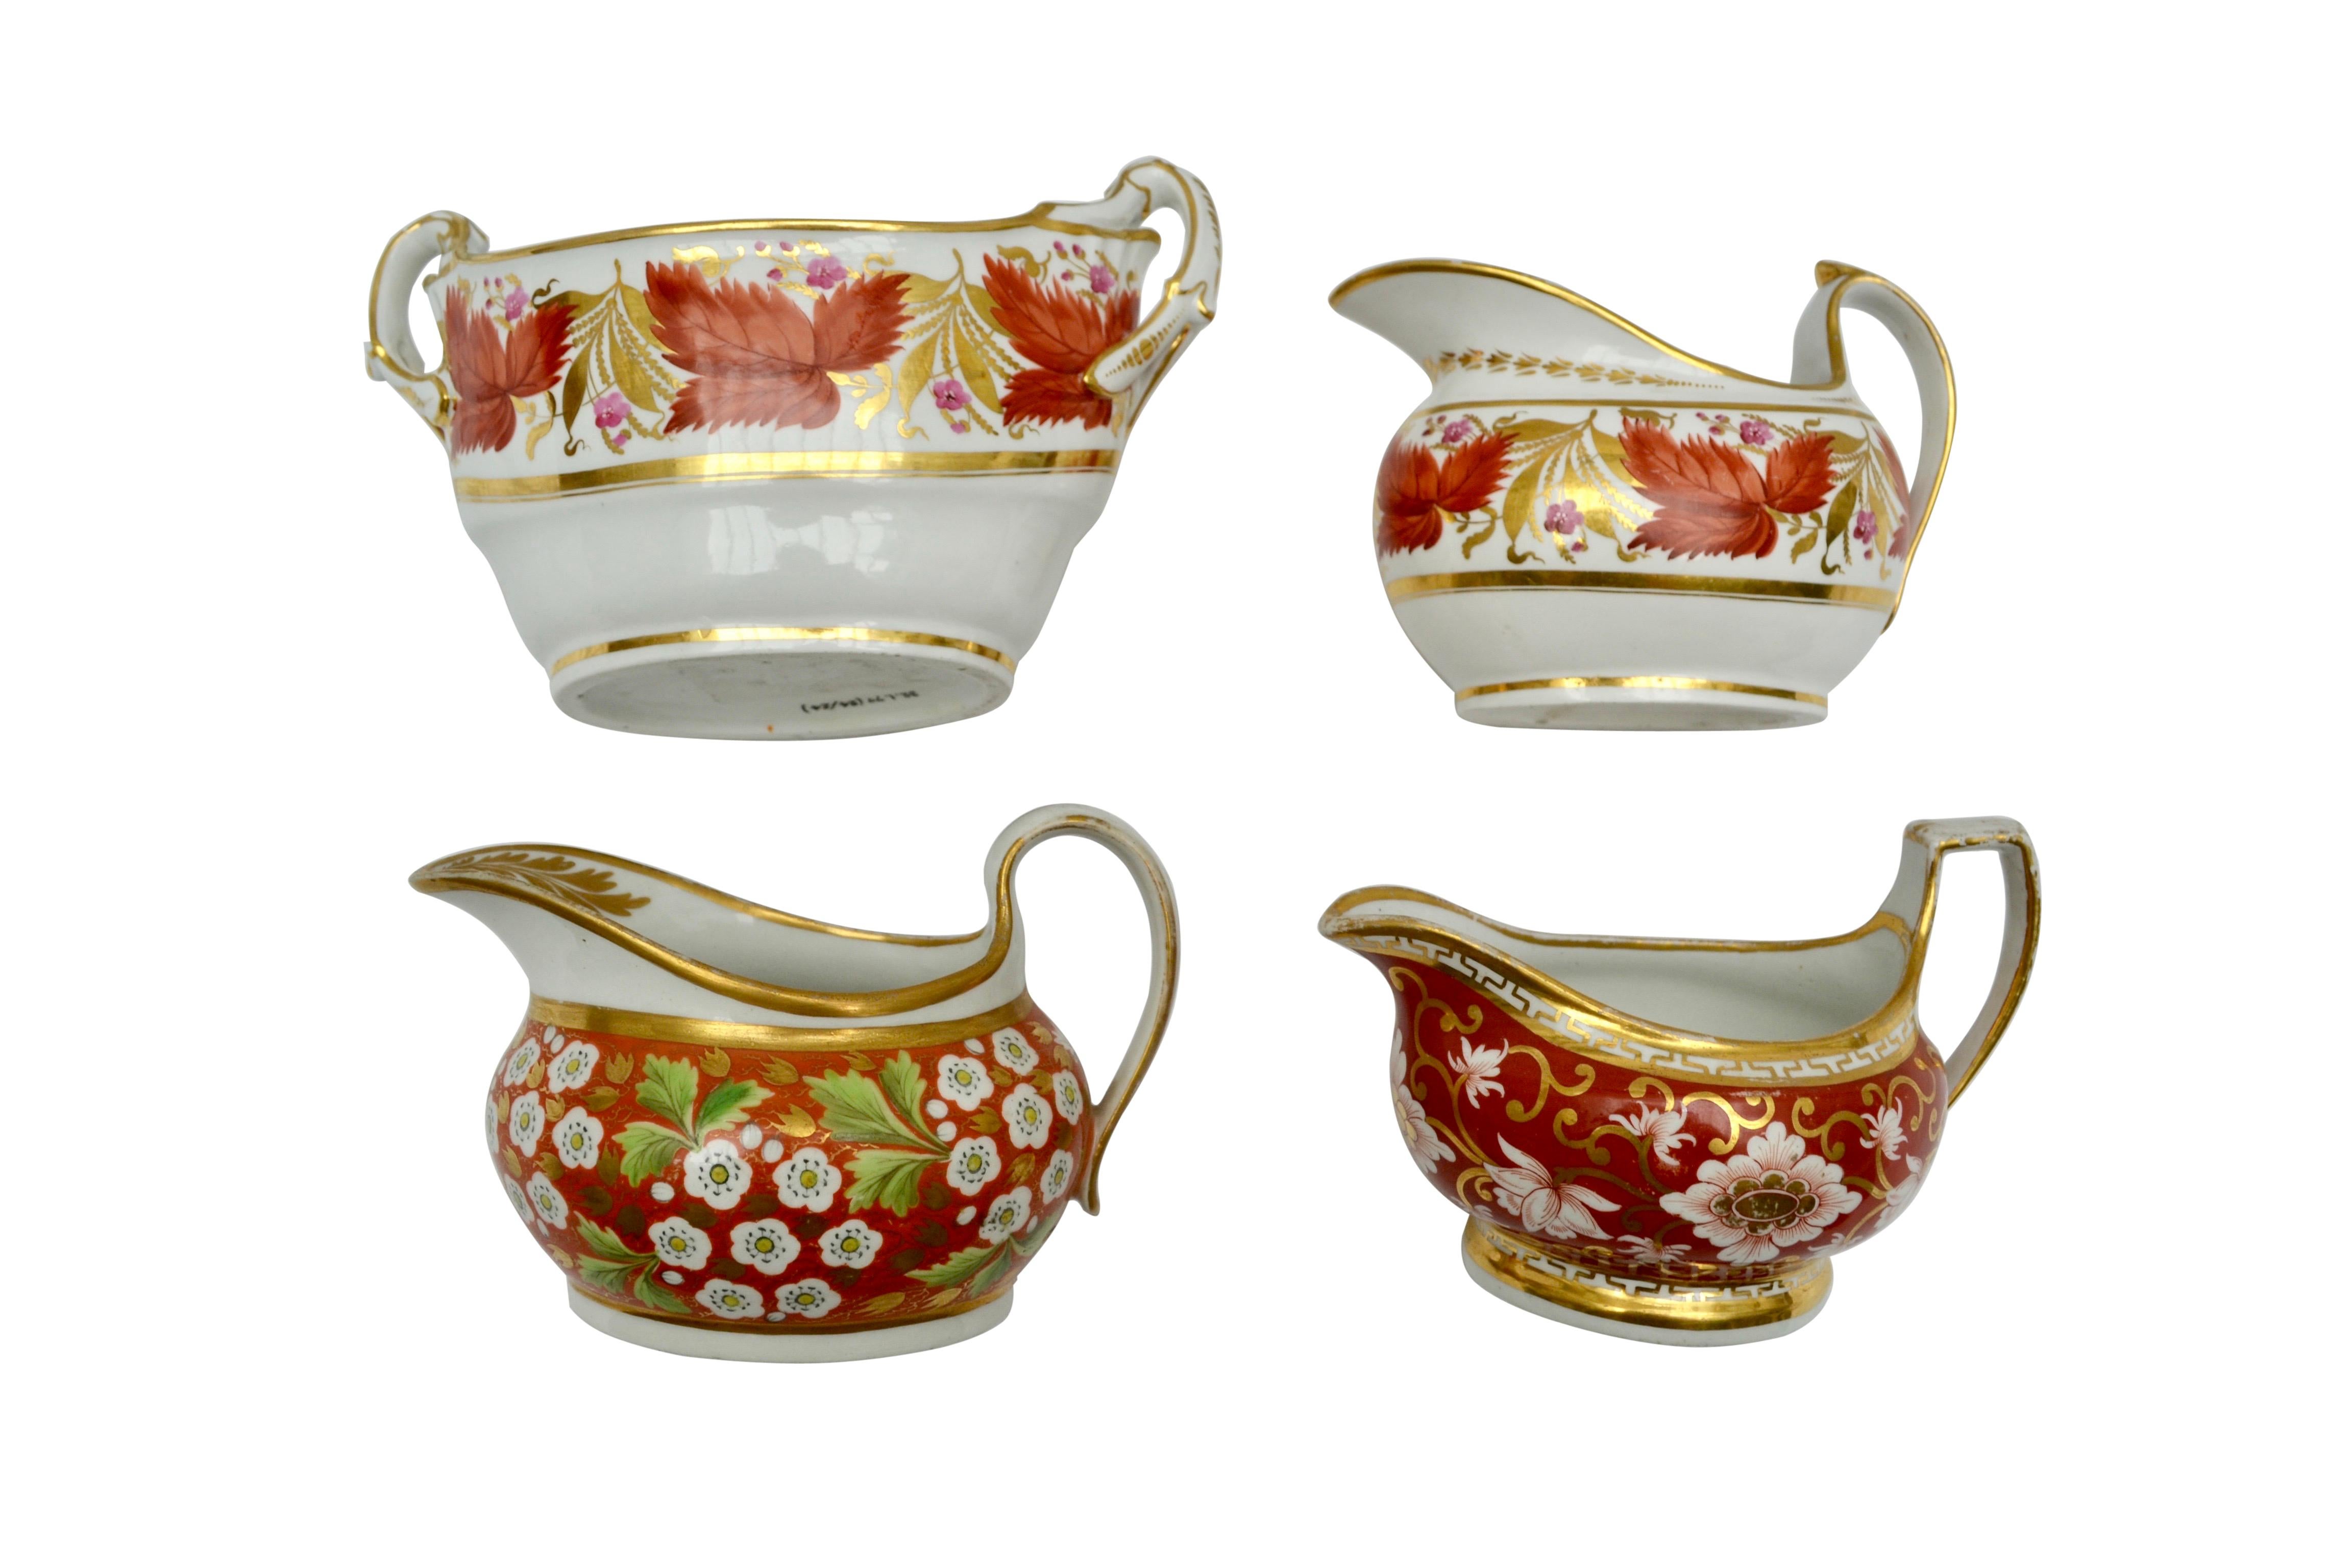 A set of four early 19th century English Porcelain sauce boats mostly in coral and gold hues The one on the left in the forefront of the leading photo is New Hall circa 1810. It measures 6